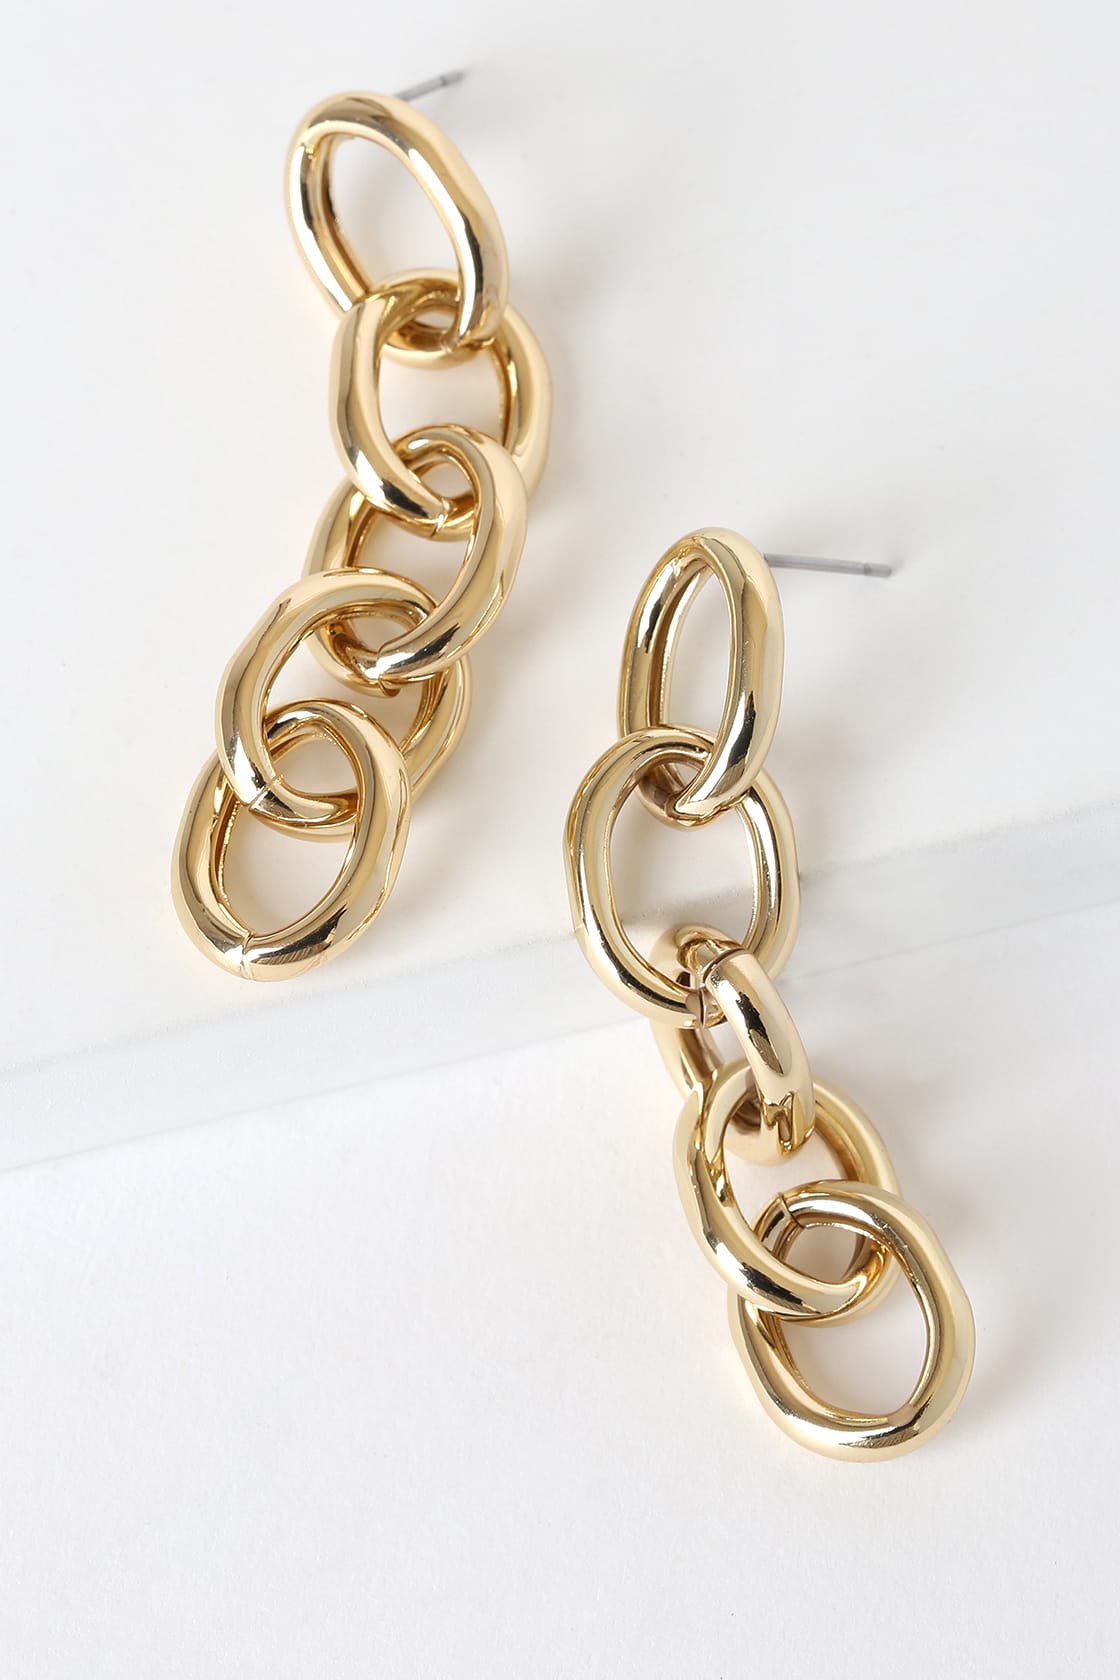 Forever Together Gold Chain Link Drop Earrings - $21 : Fashion at Lulus.com